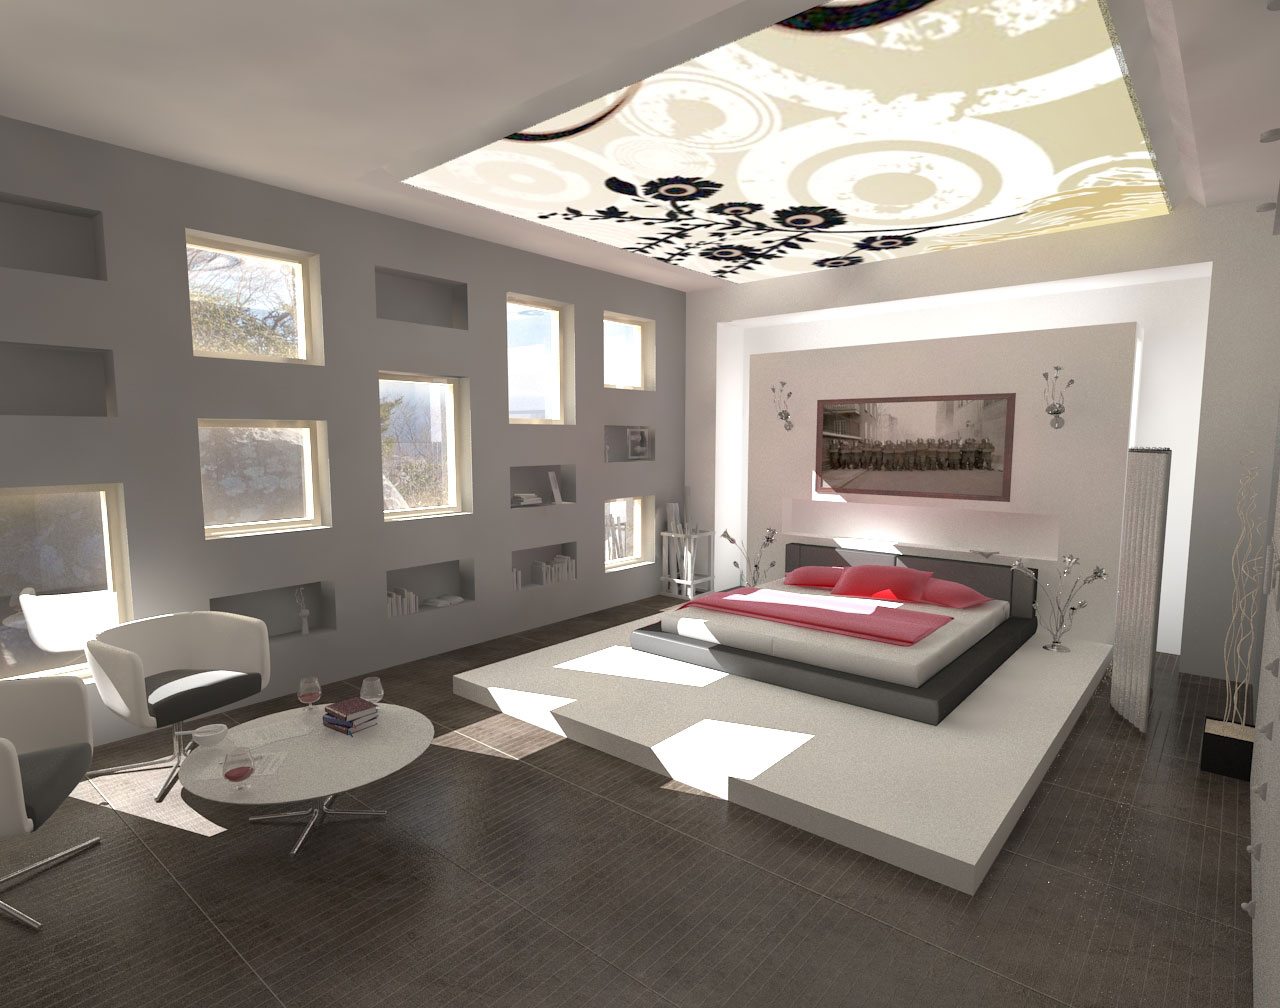 Outstanding Modern Bedroom Style Plan Escorted By White King Bed On Grey Platform Furnished Escorted By Decorations On Side Bed Also Completed Escorted By Oval Table And Chairs Bedroom